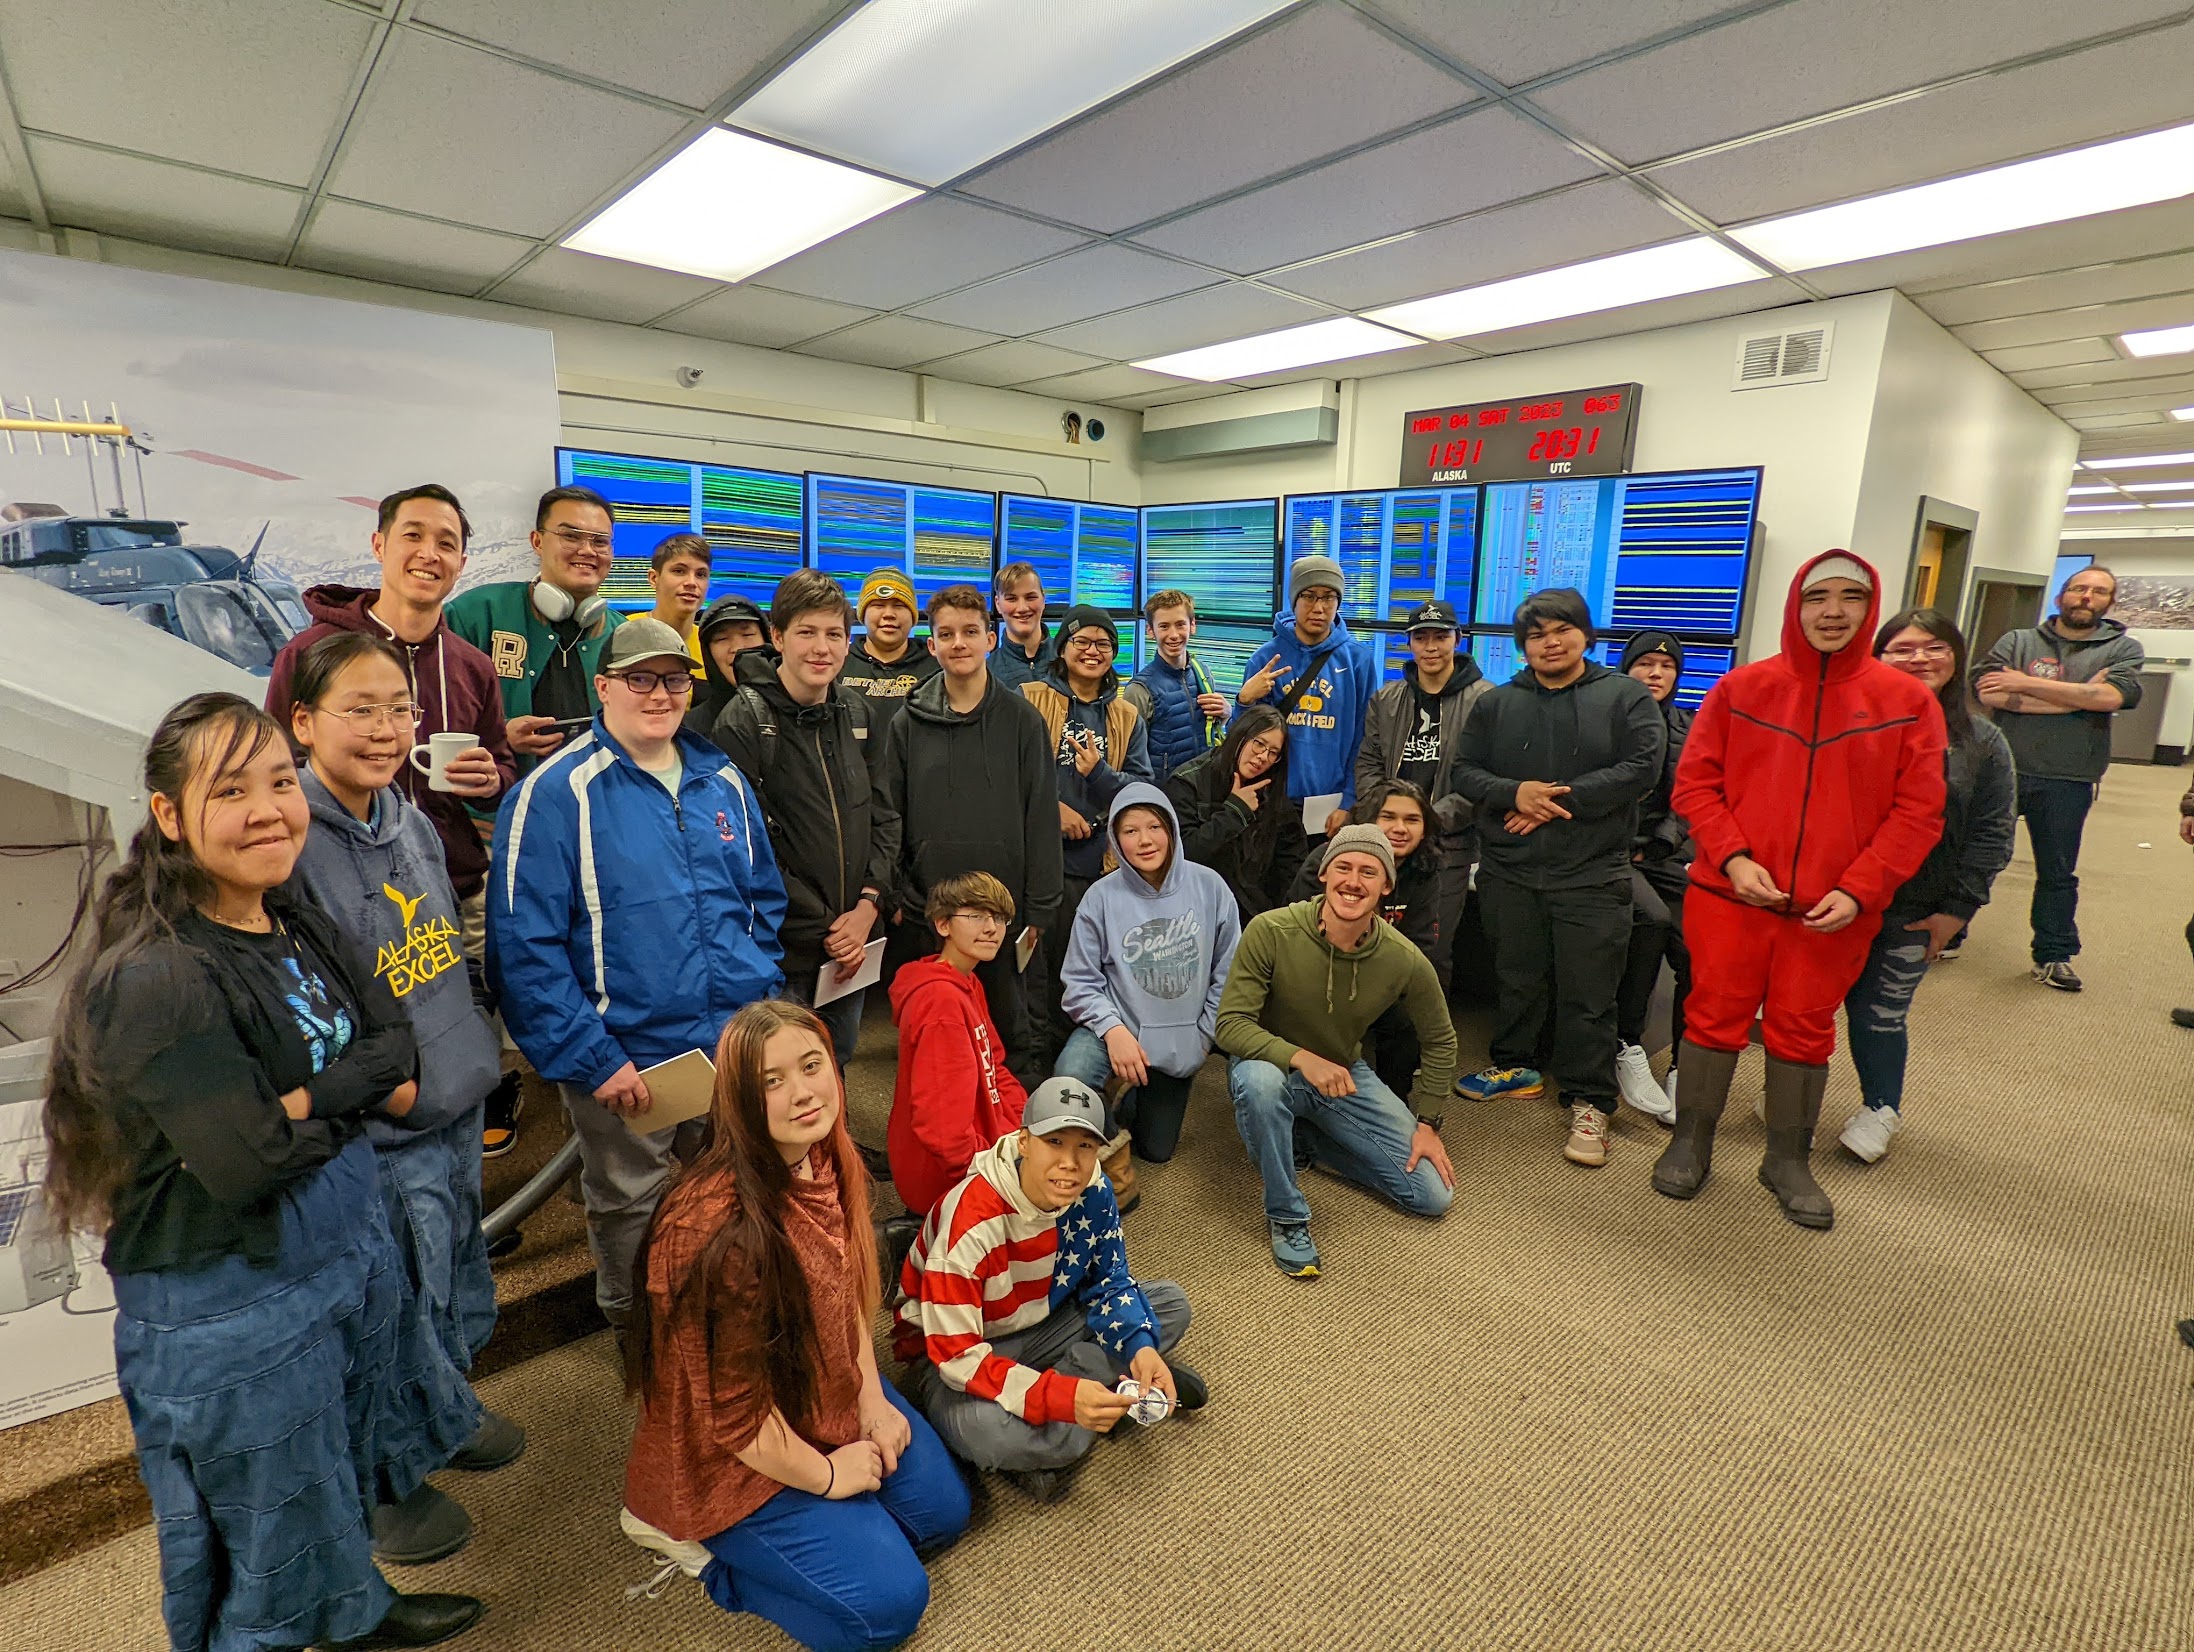 Group of students in front of seismograph screen displays.